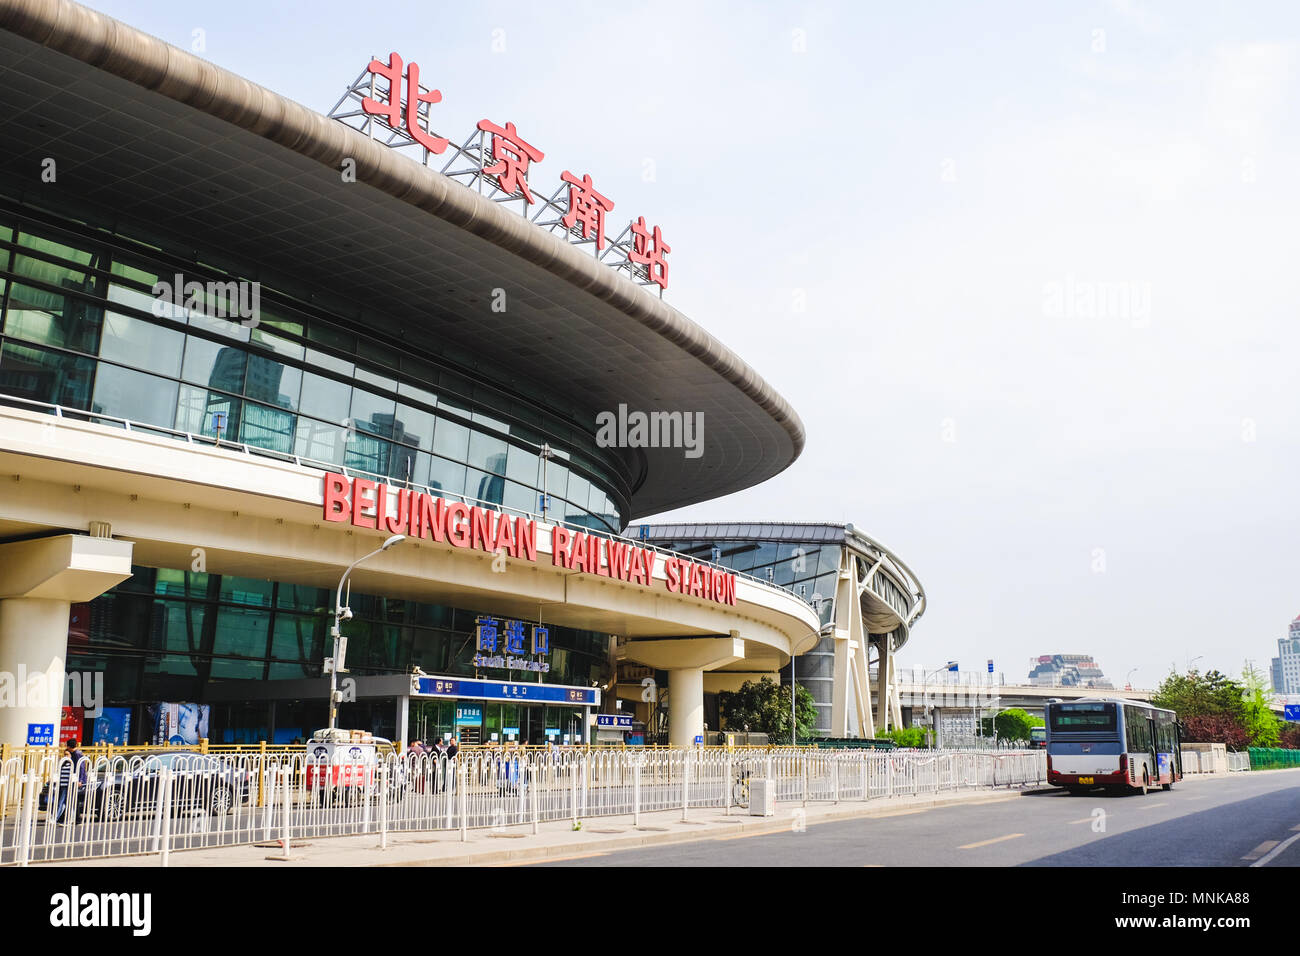 BEIJING, CHINA - APRIL 30, 2018: Exterior of Beijing South Railway Station in Fengtai District Beijing, China. Stock Photo